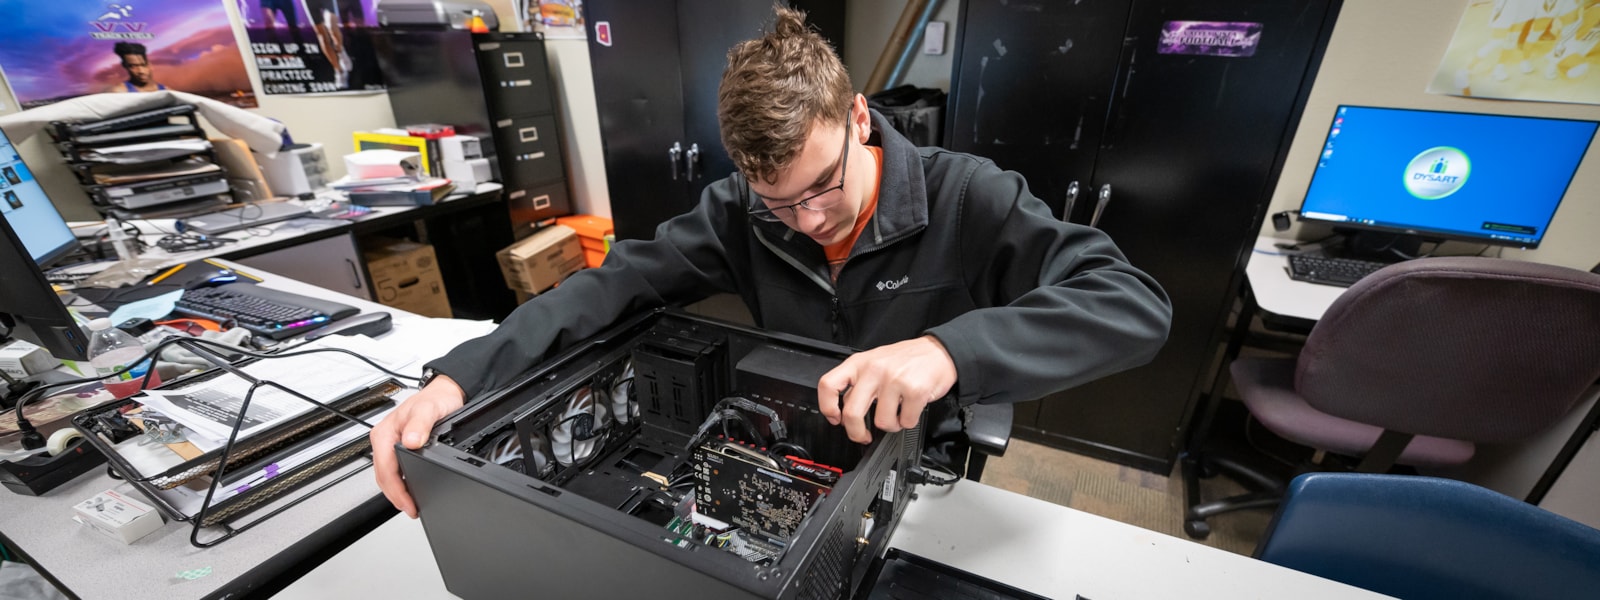 student working on inside of computer.